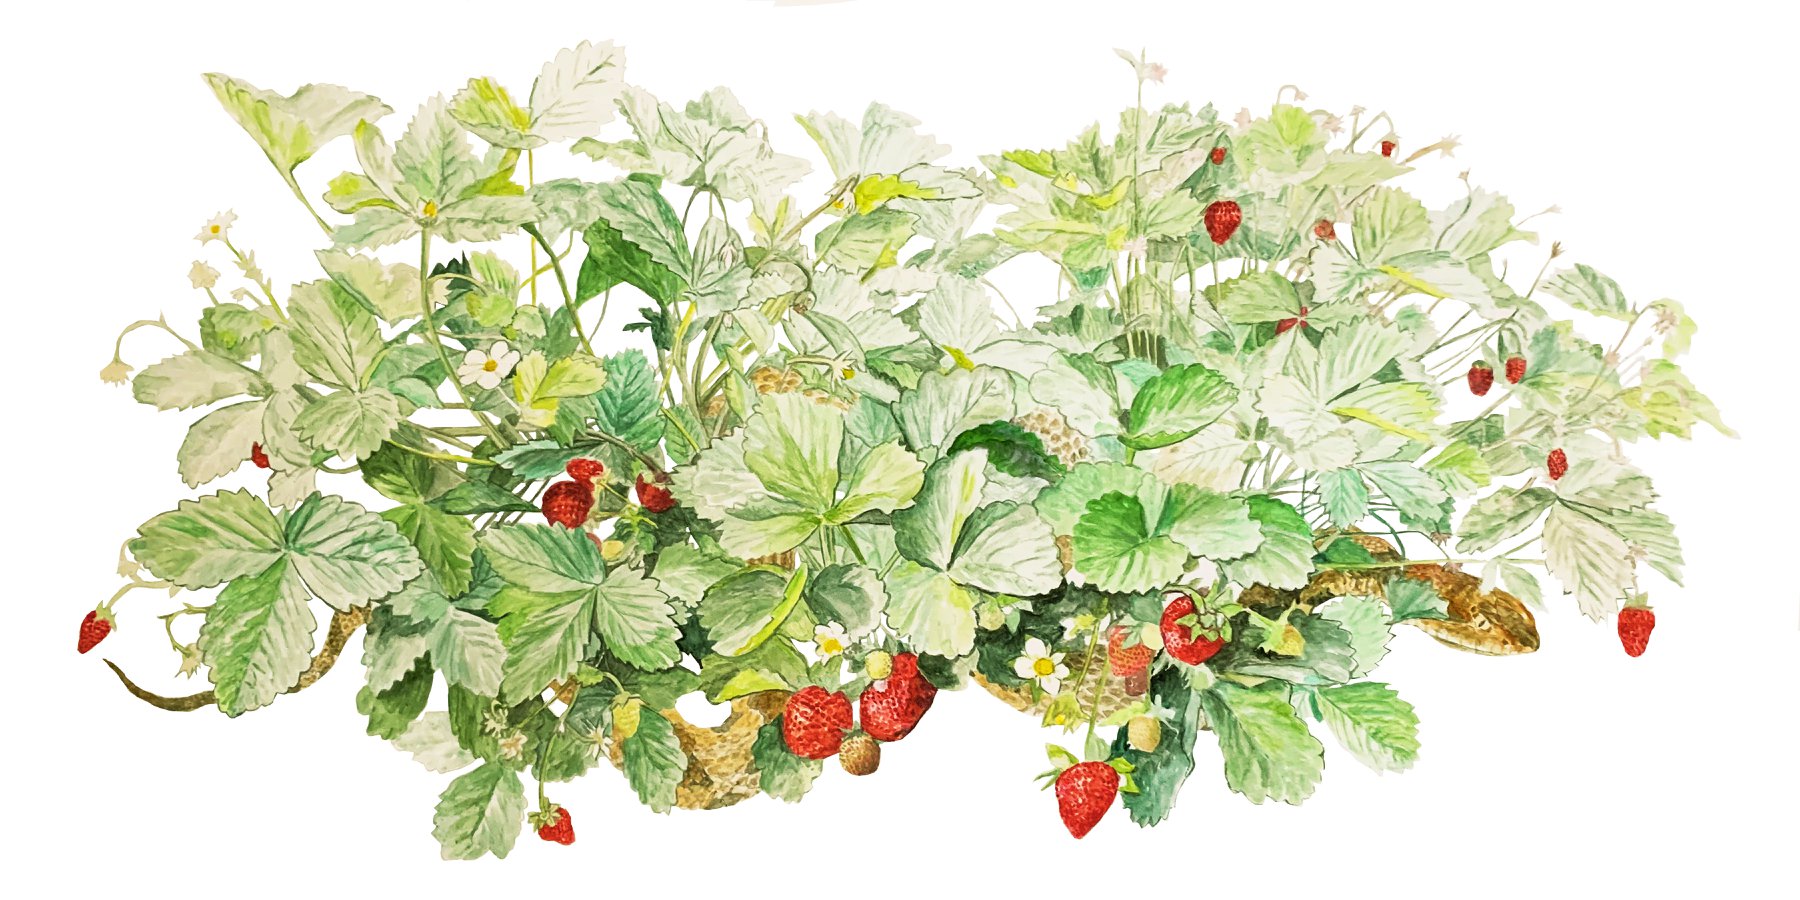 “Tempted (Serpent in the Strawberries)” 20”x29” watercolor.